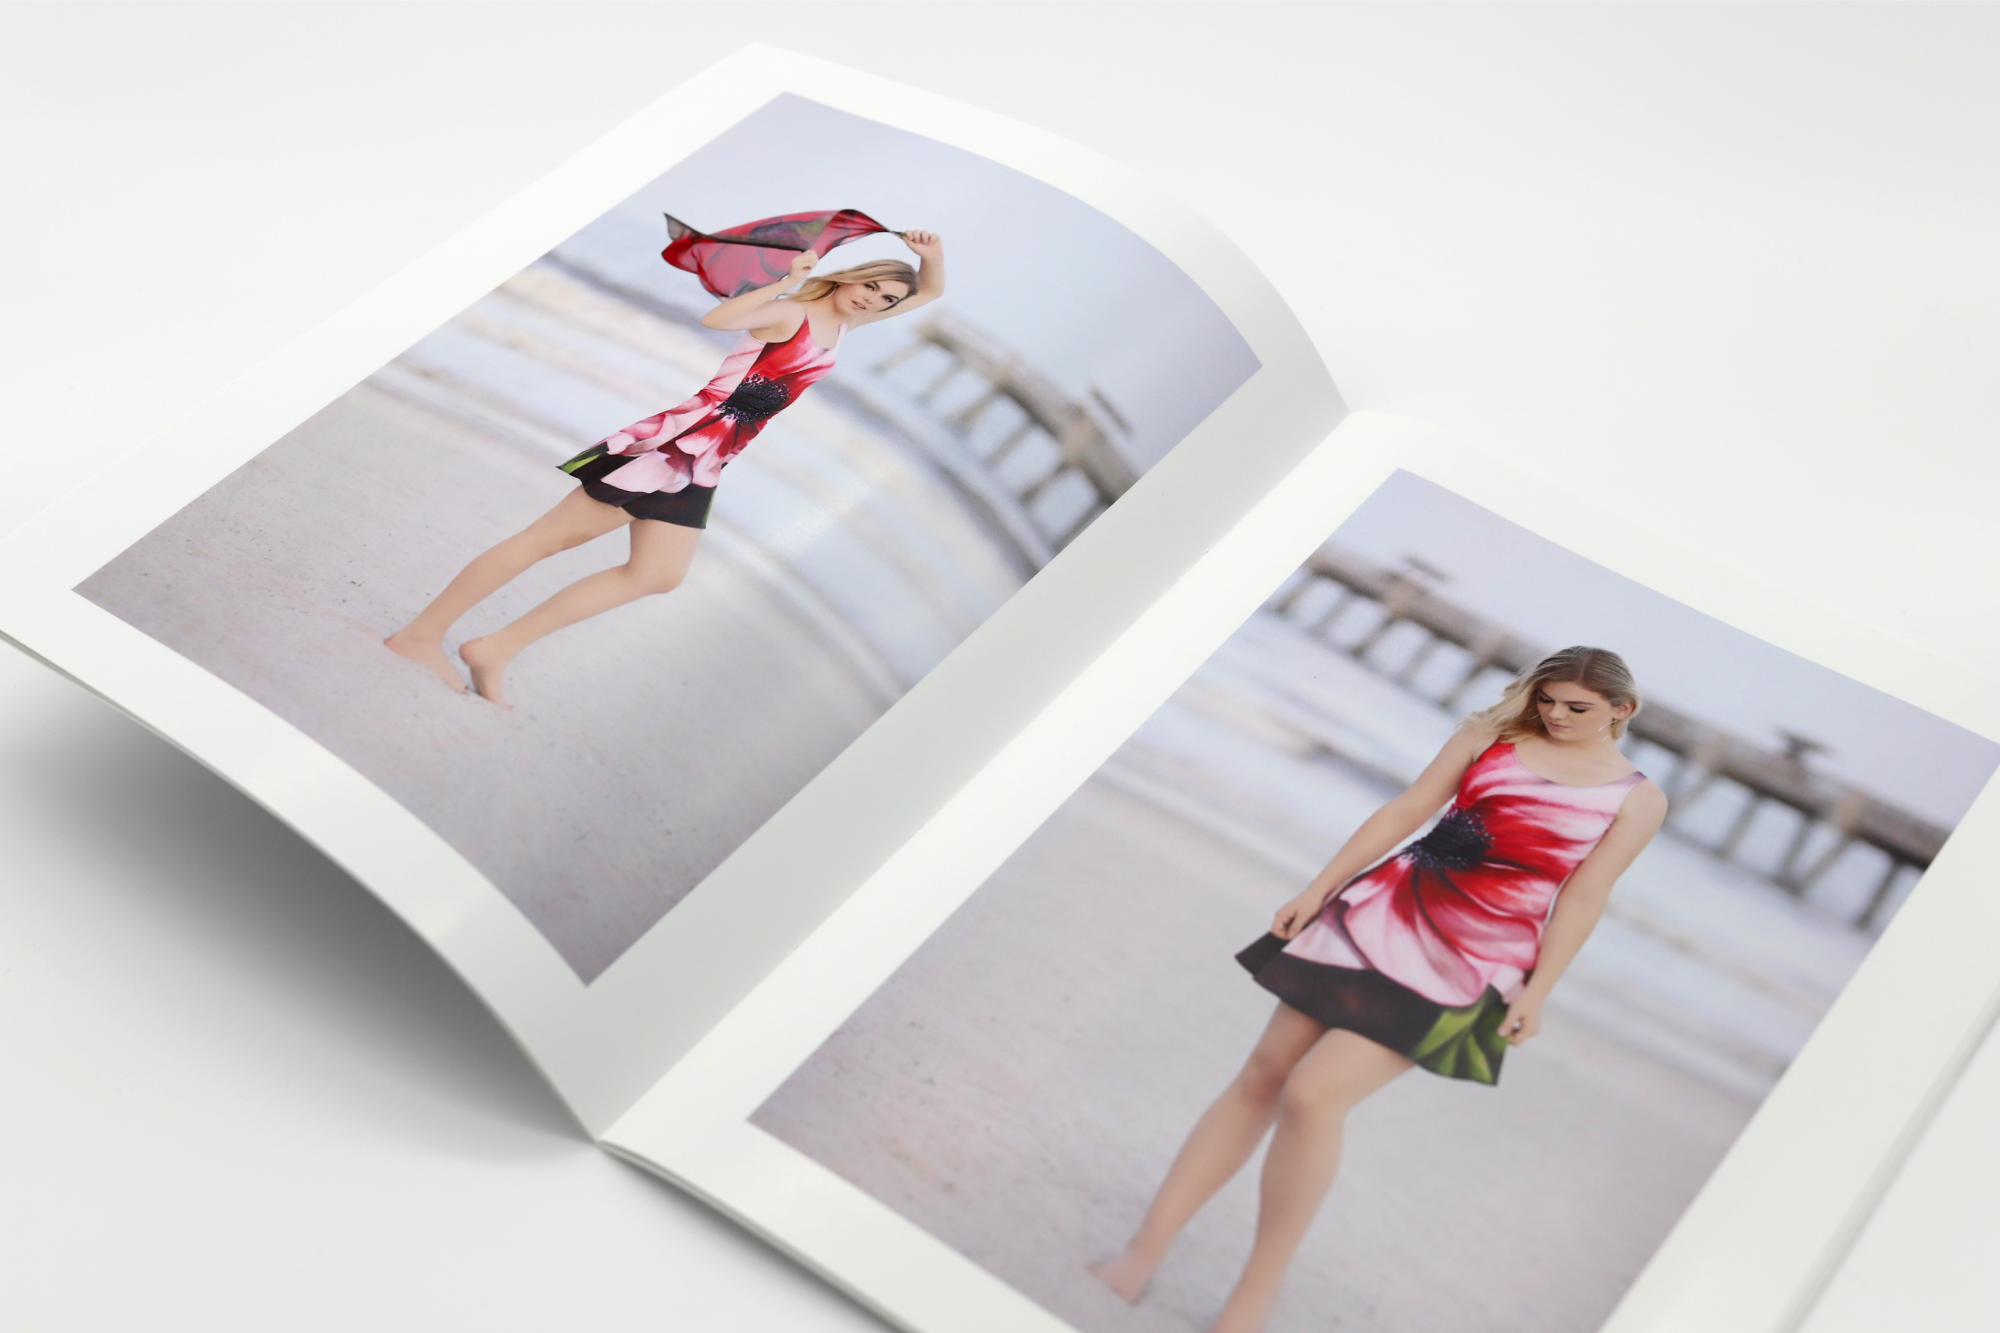 Why You Should Make an Apparel Catalog to Showcase Your Clothing Line